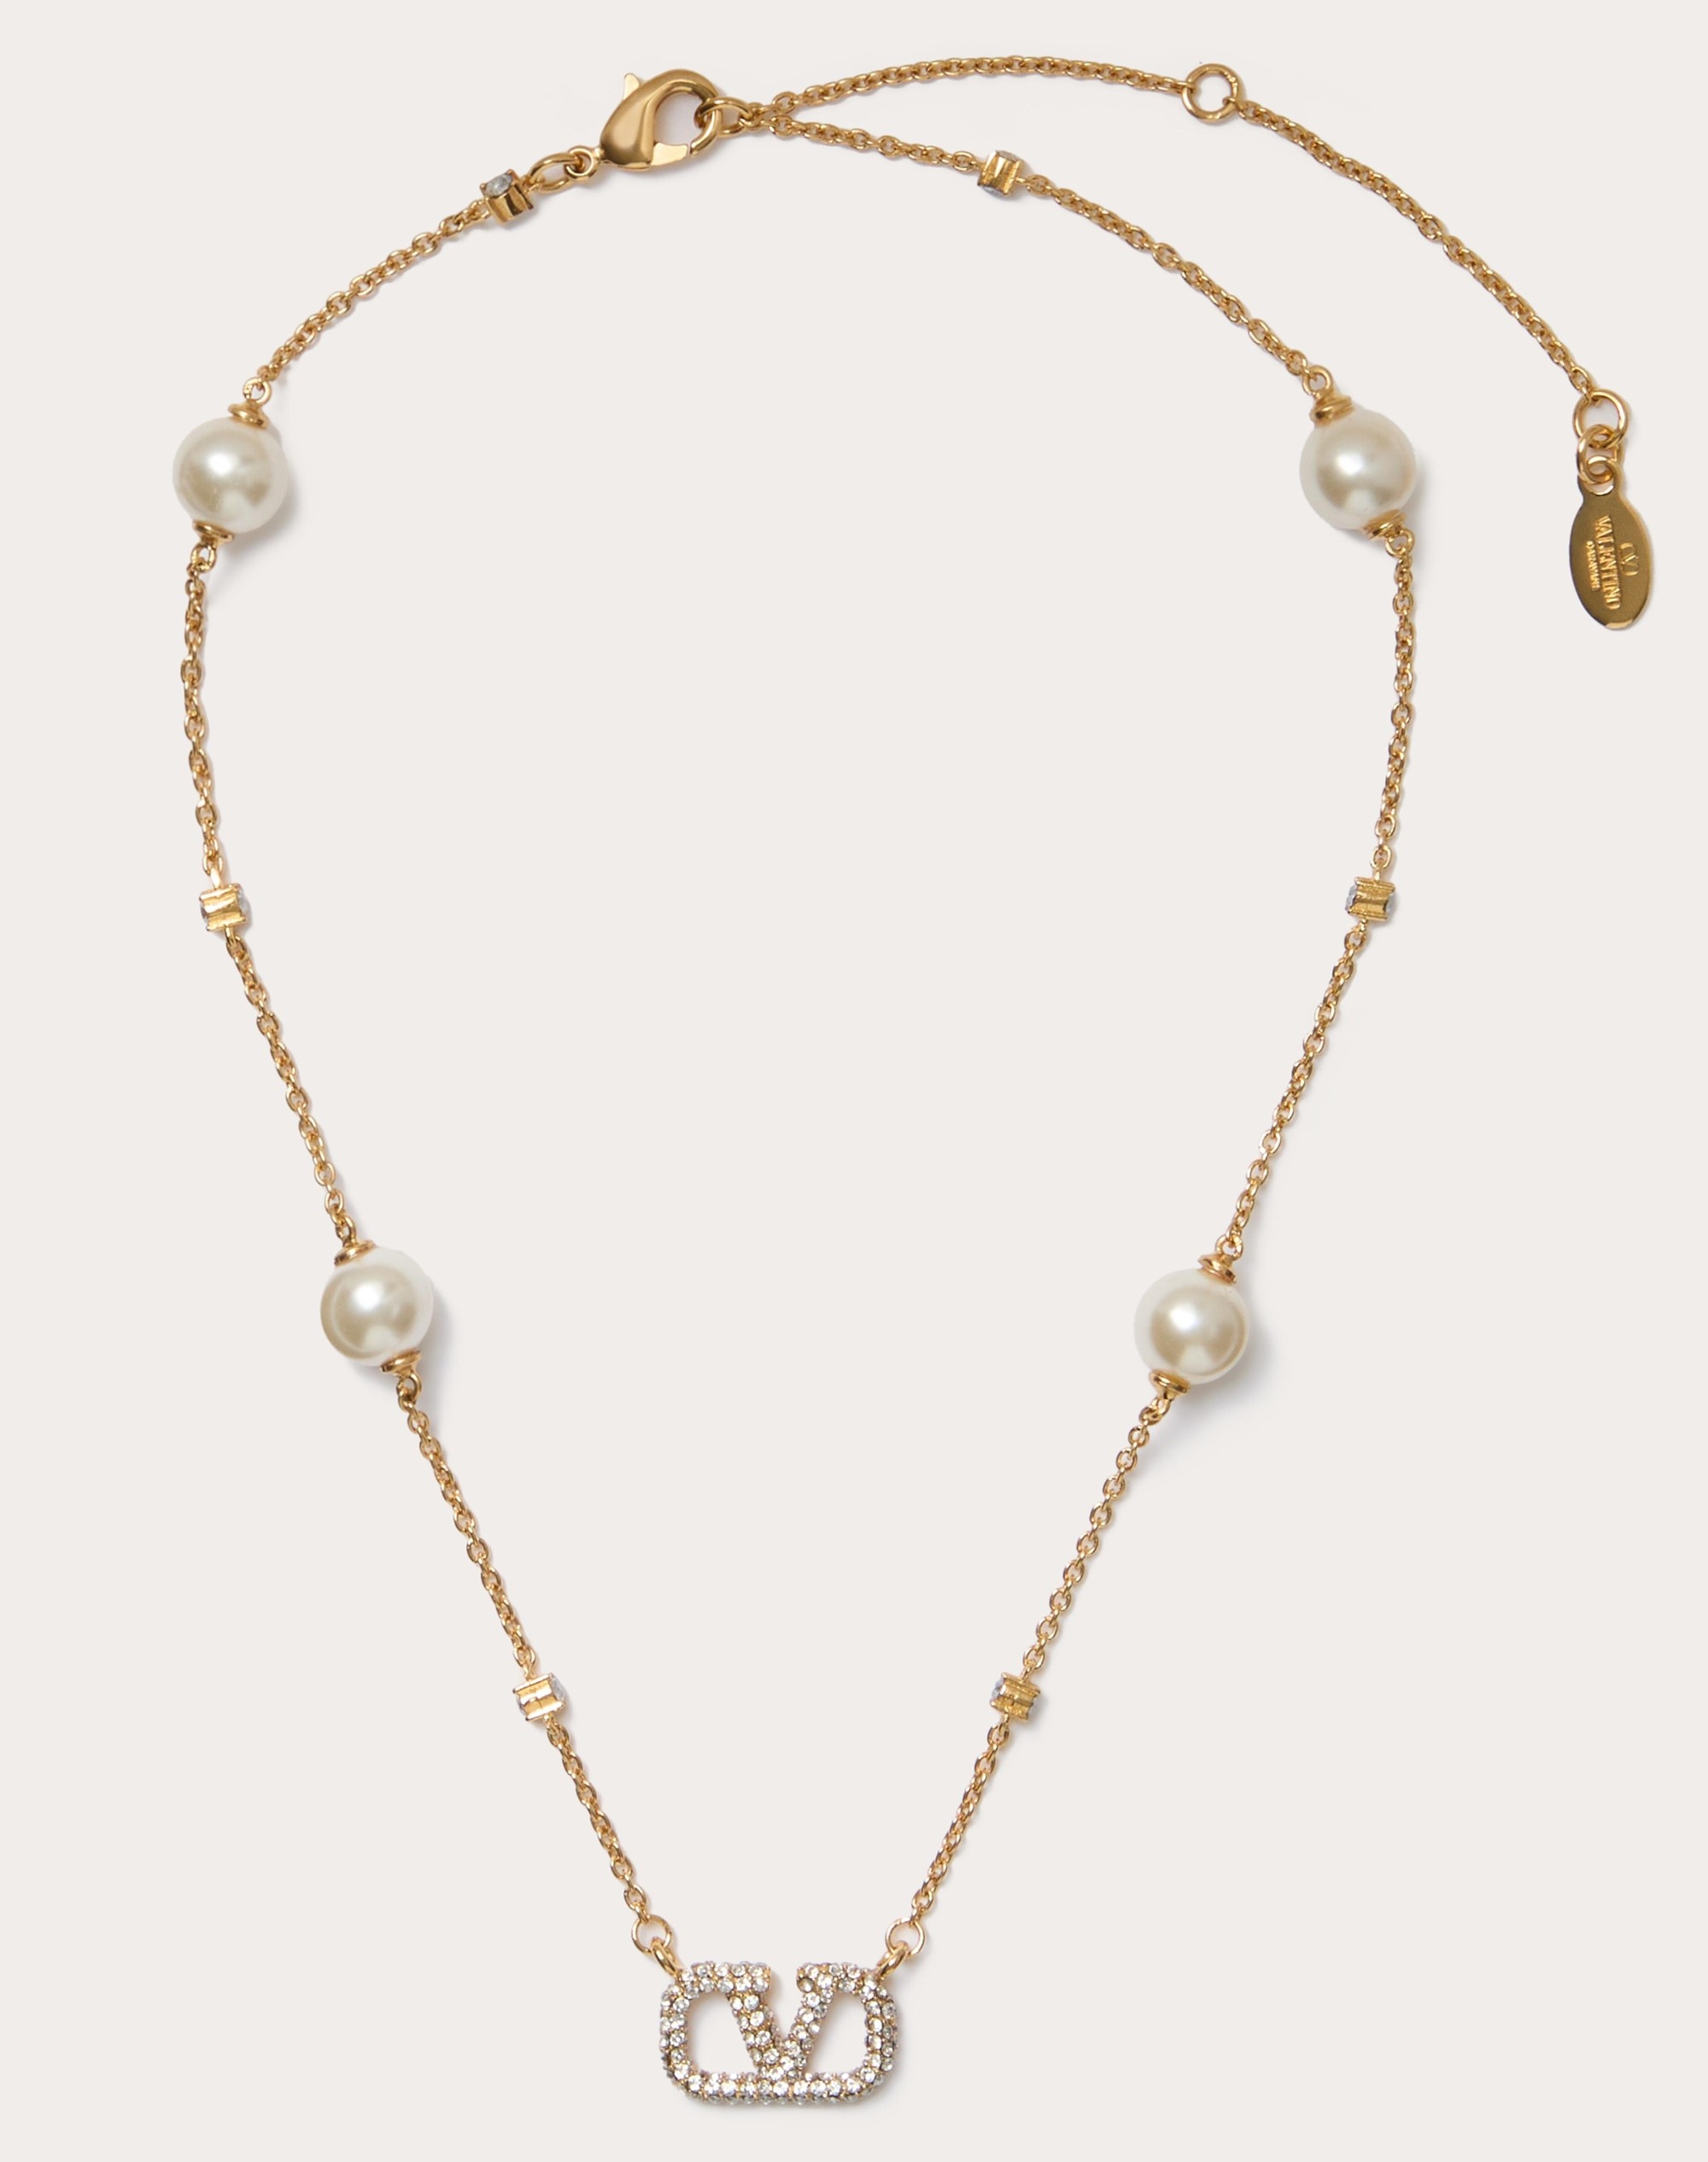 VLOGO SIGNATURE METAL NECKLACE WITH SWAROVSKI® CRYSTALS AND PEARLS - 1